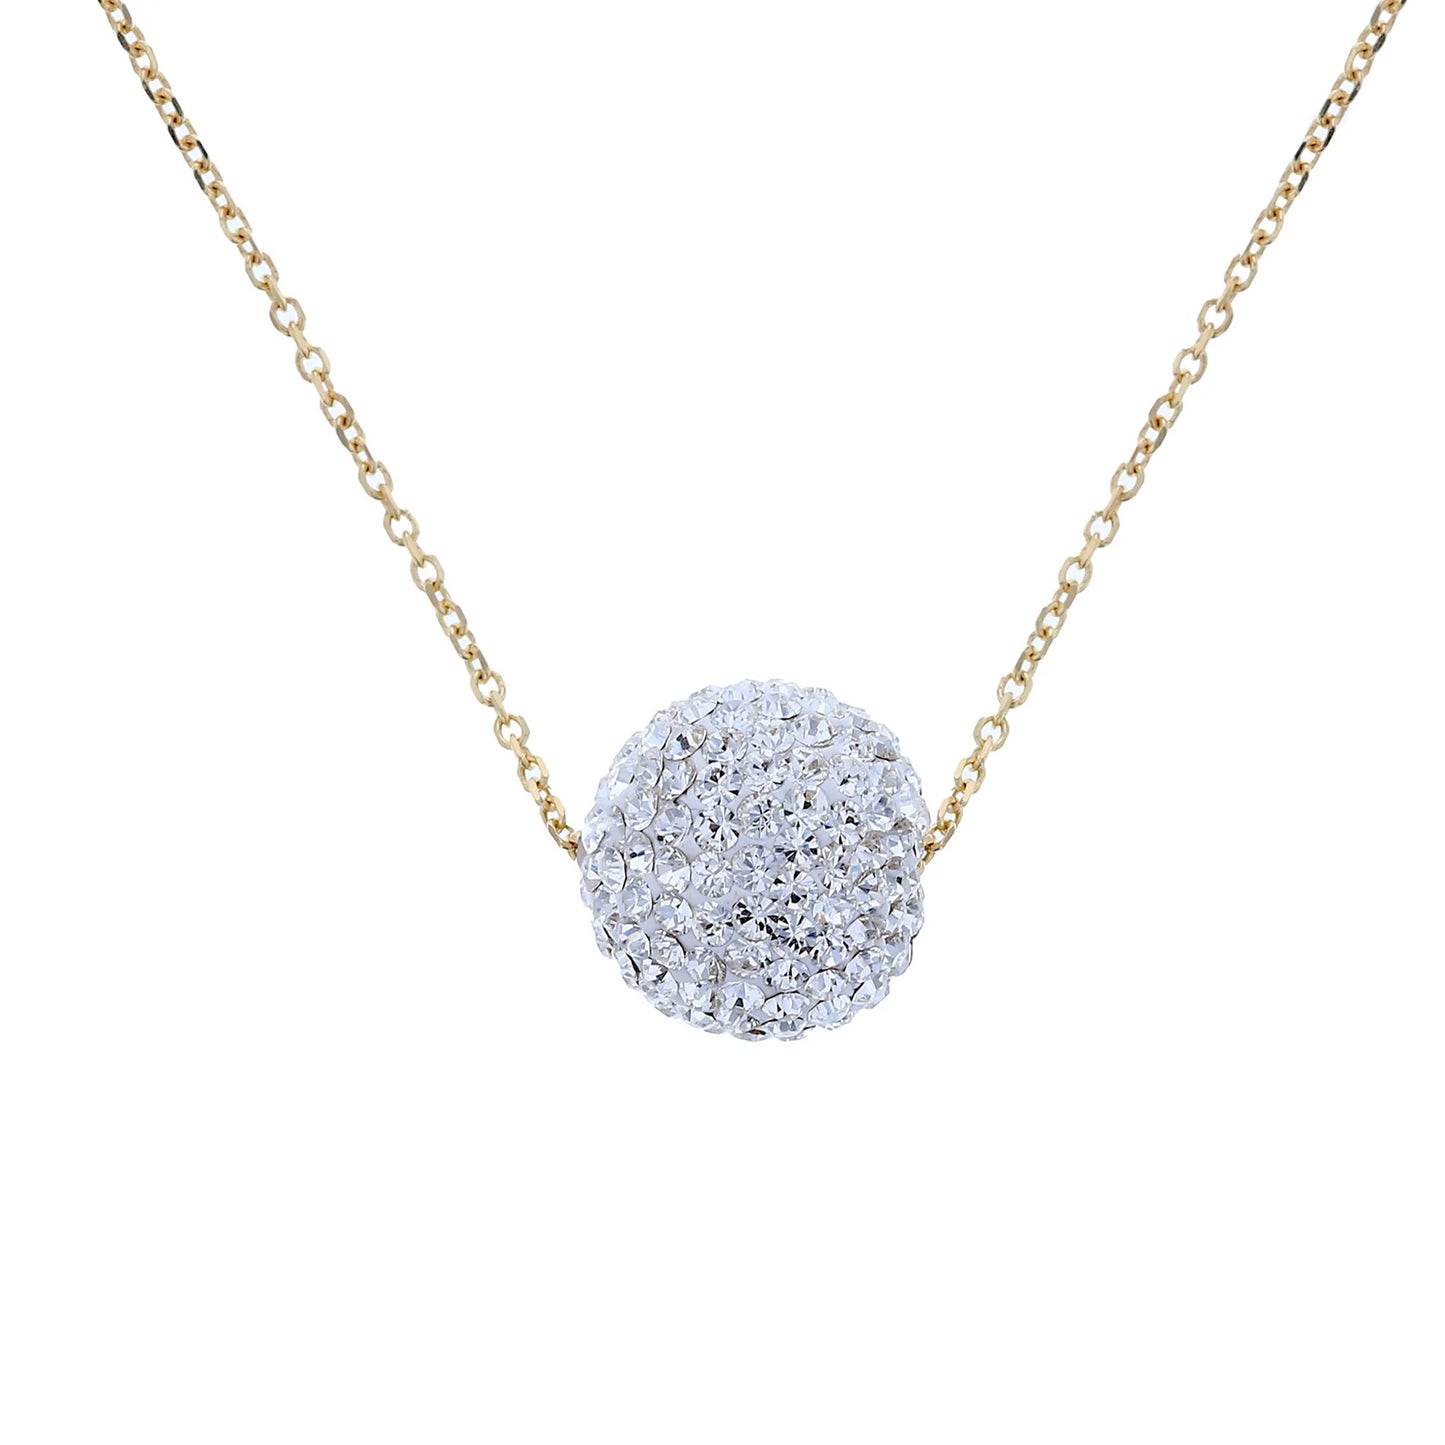 18K Gold Plated Sterling Silver Circle Medallion Necklace with White Crystal